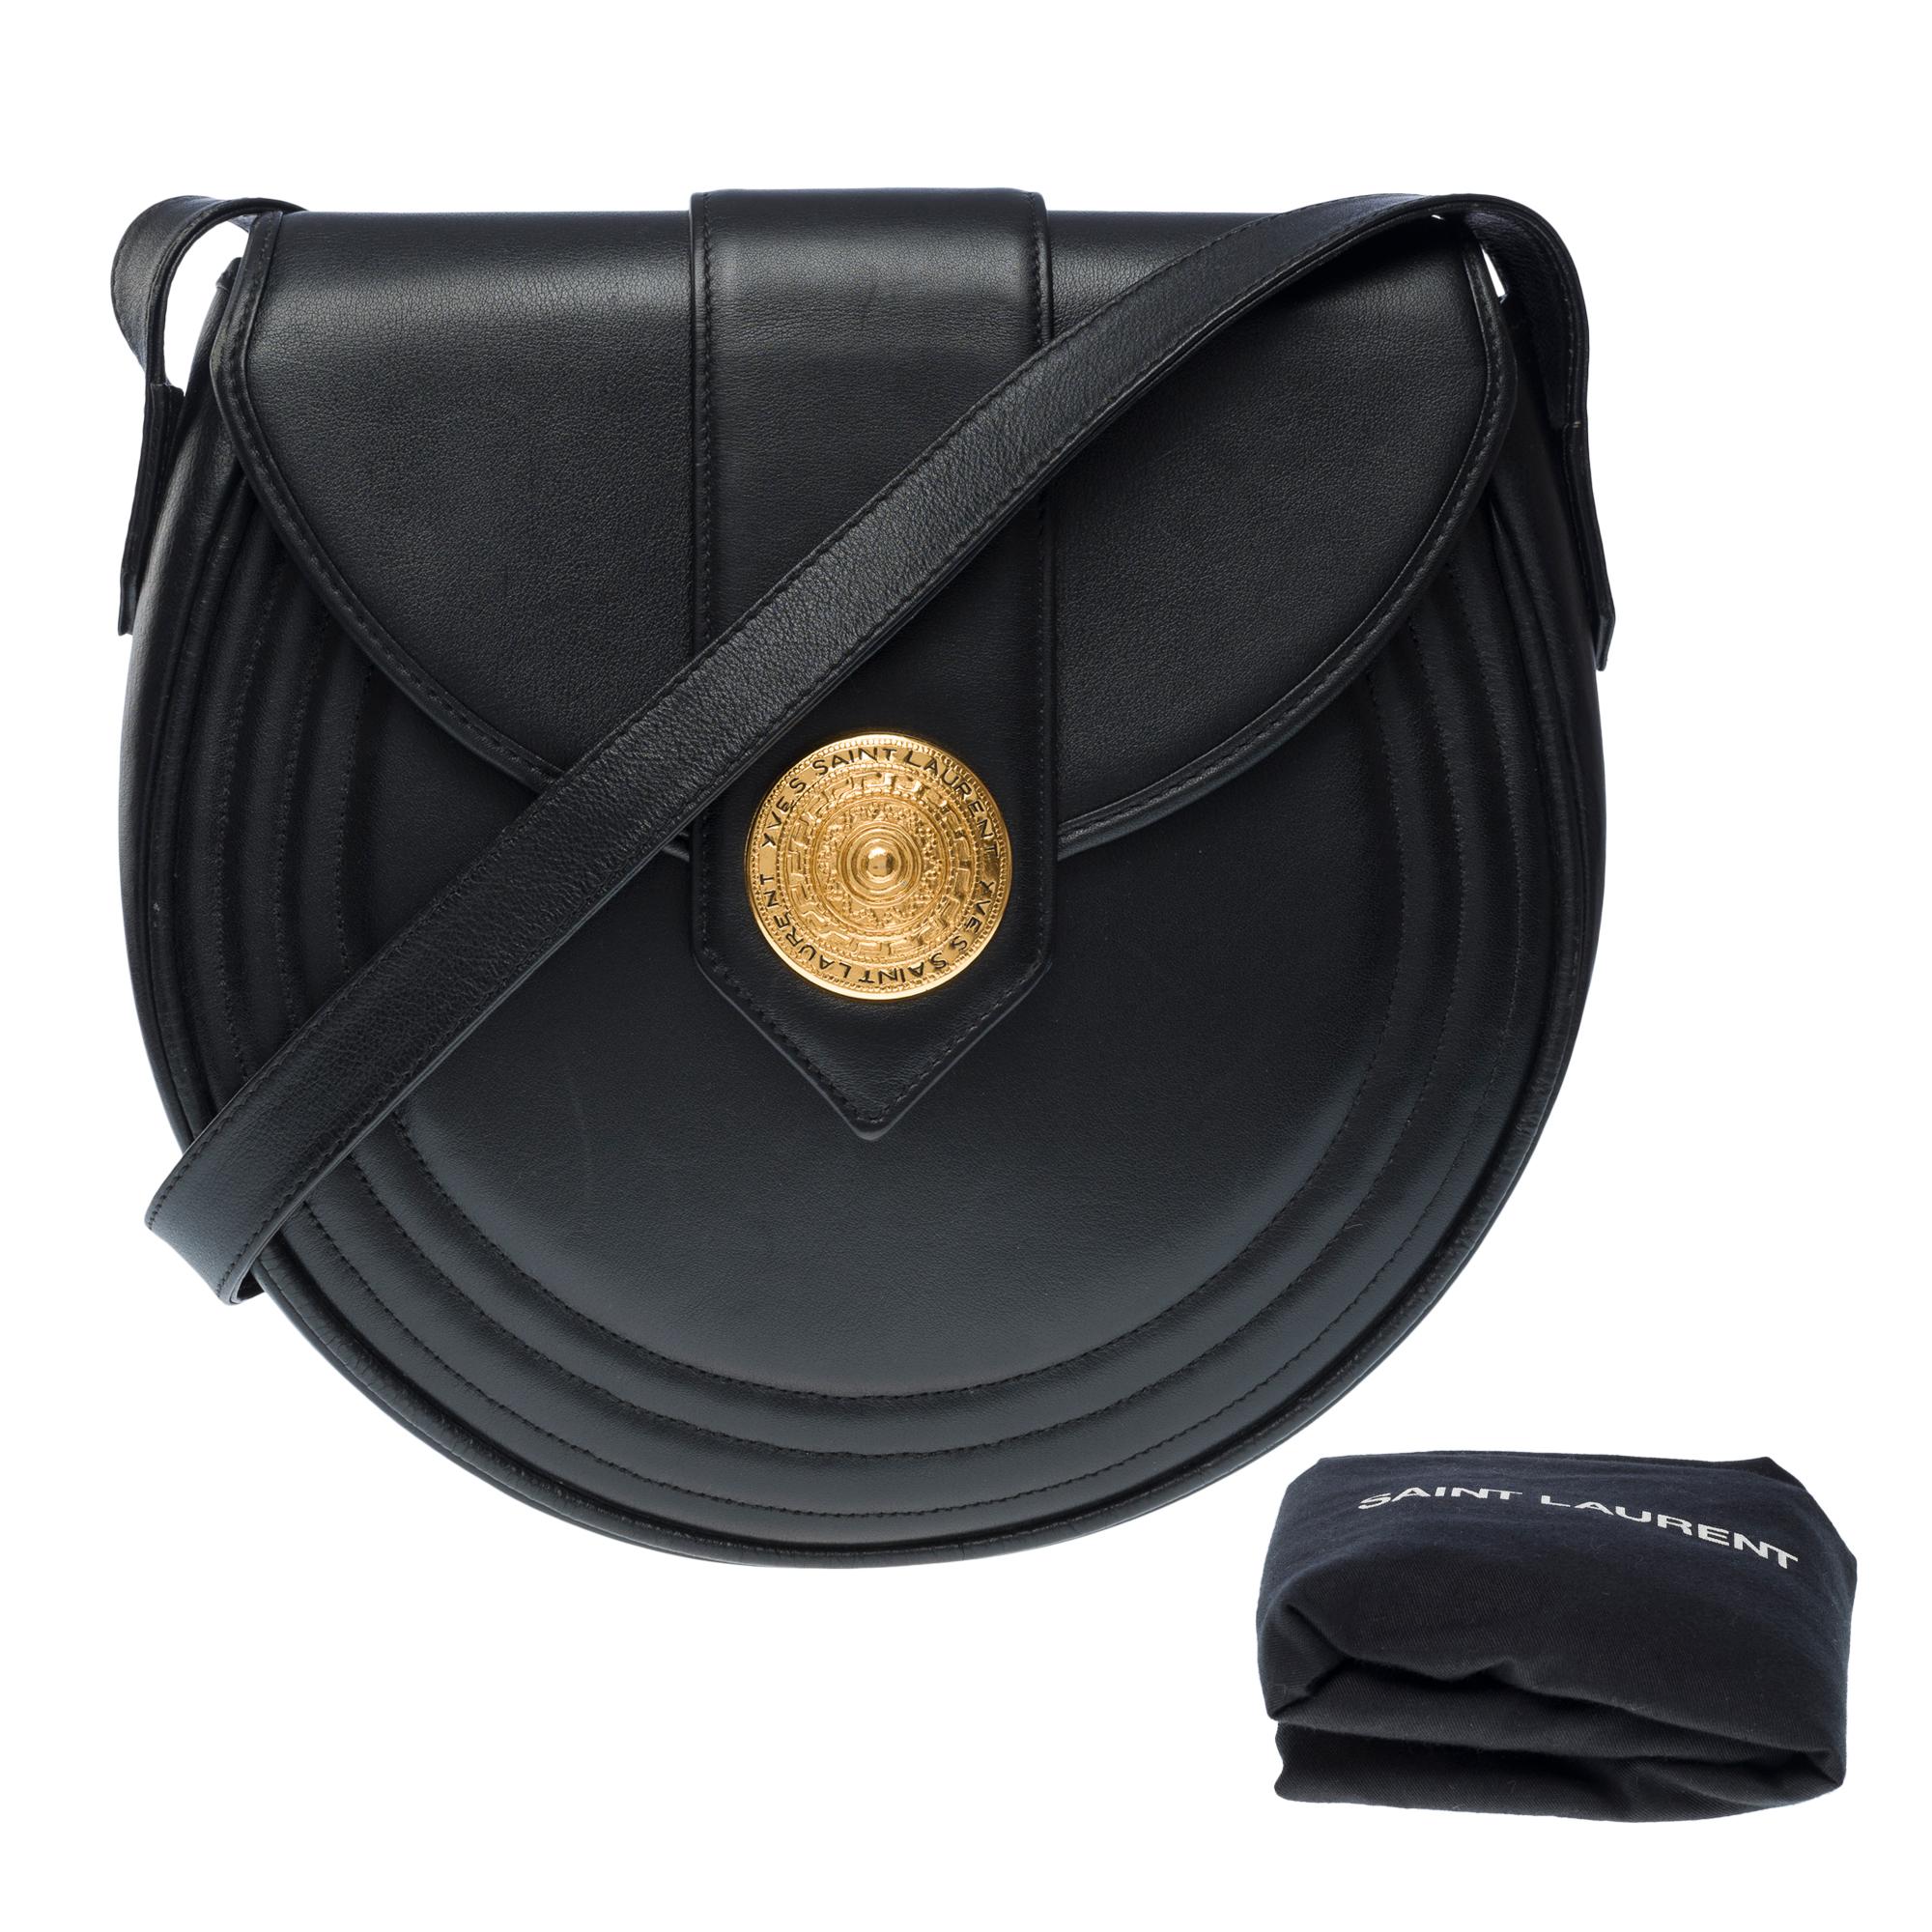 Lovely YSL shoulder bag in the shape of a half moon in black leather, gold metal trim, adjustable shoulder strap in black leather allowing a shoulder or crossbody carry

Magnetic clasp
Black canvas lining with logo, 1 zipped pocket
Signature: